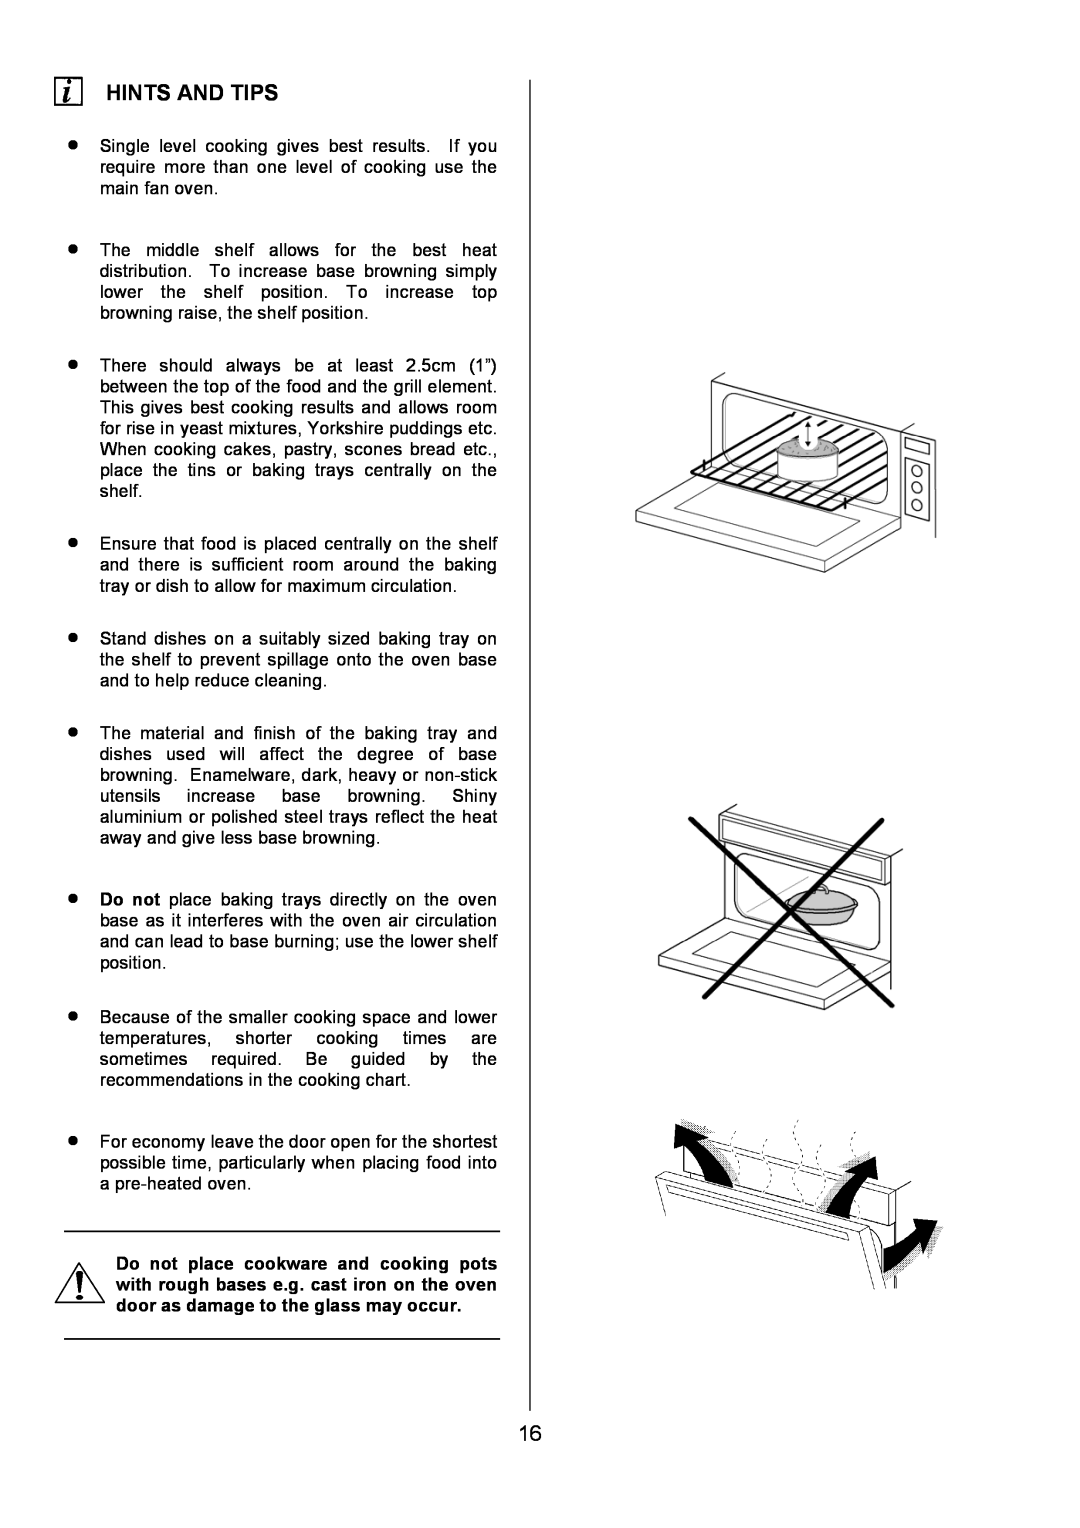 Electrolux U7101-4 operating instructions Hints And Tips 